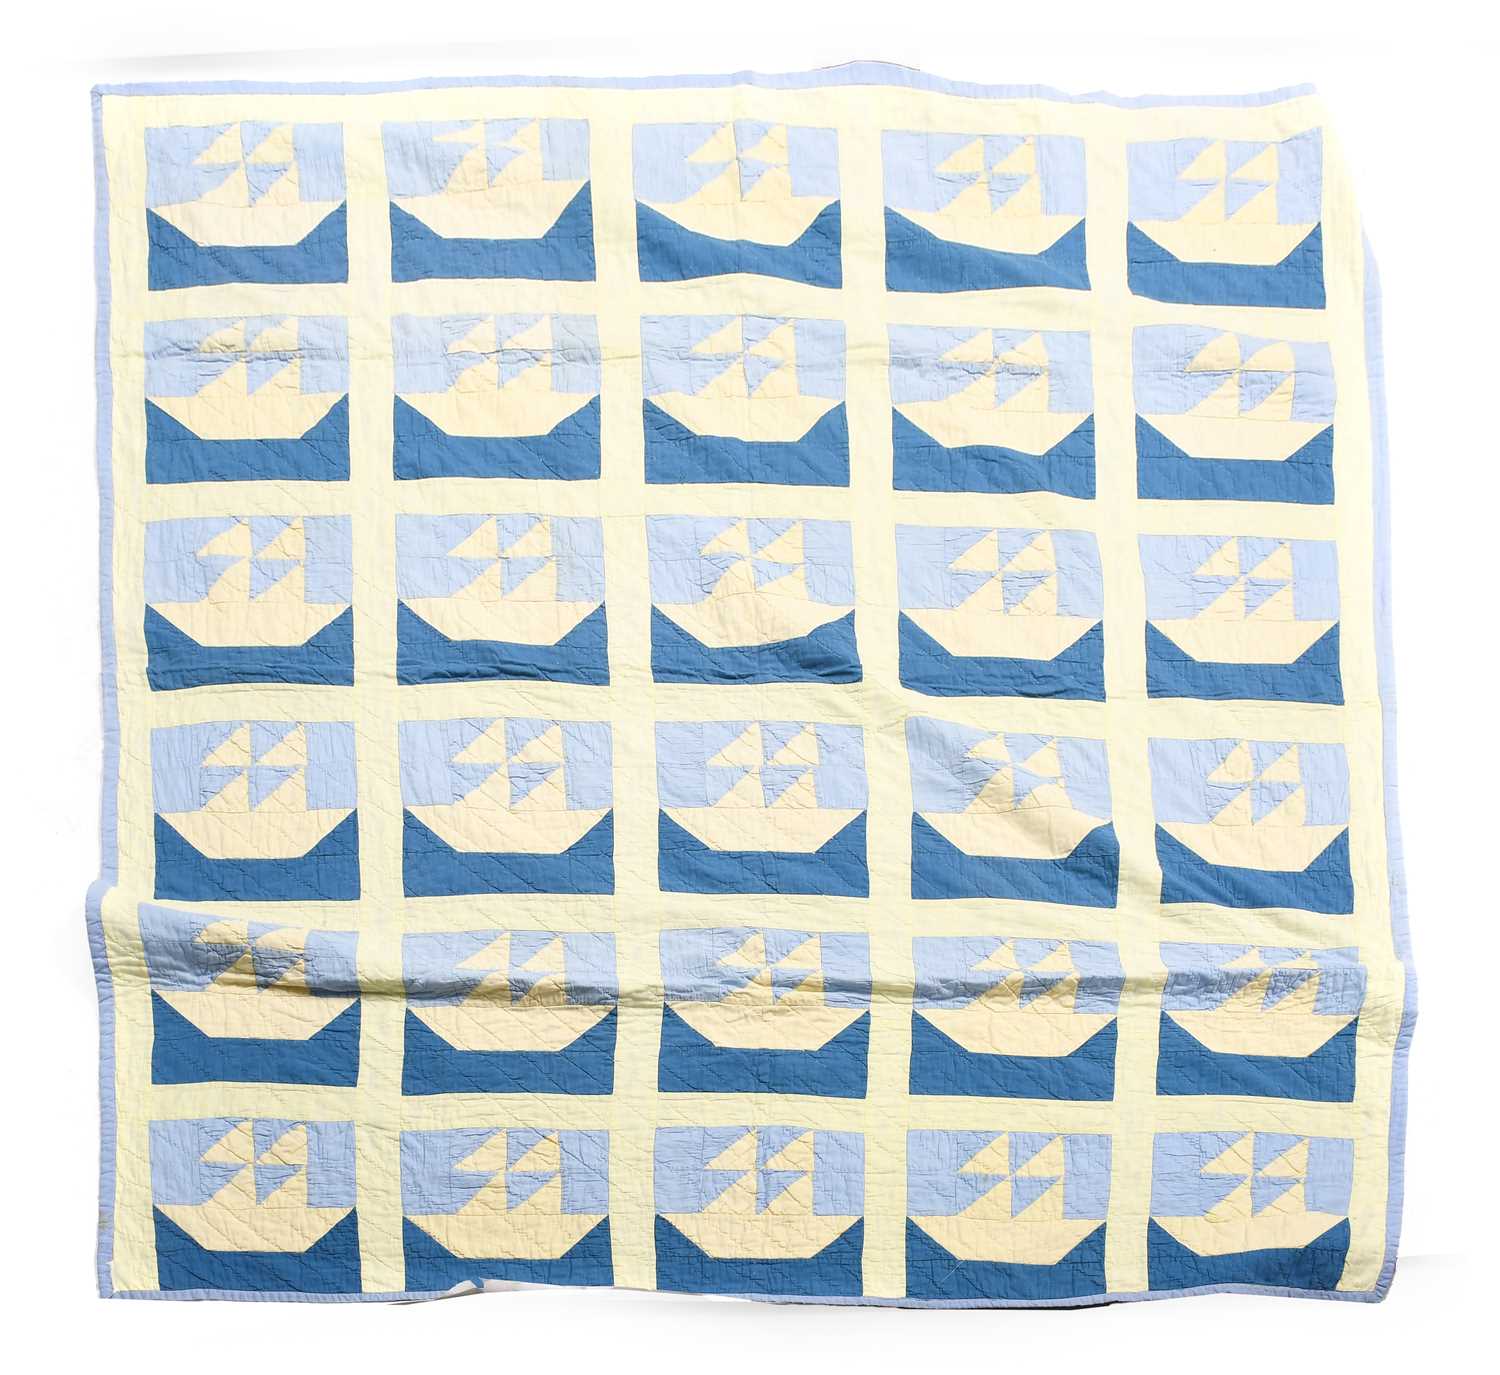 Circa 1935 Canadian Cotton Patchwork Quilt, depicting twin mast sailing boats within squares in pale